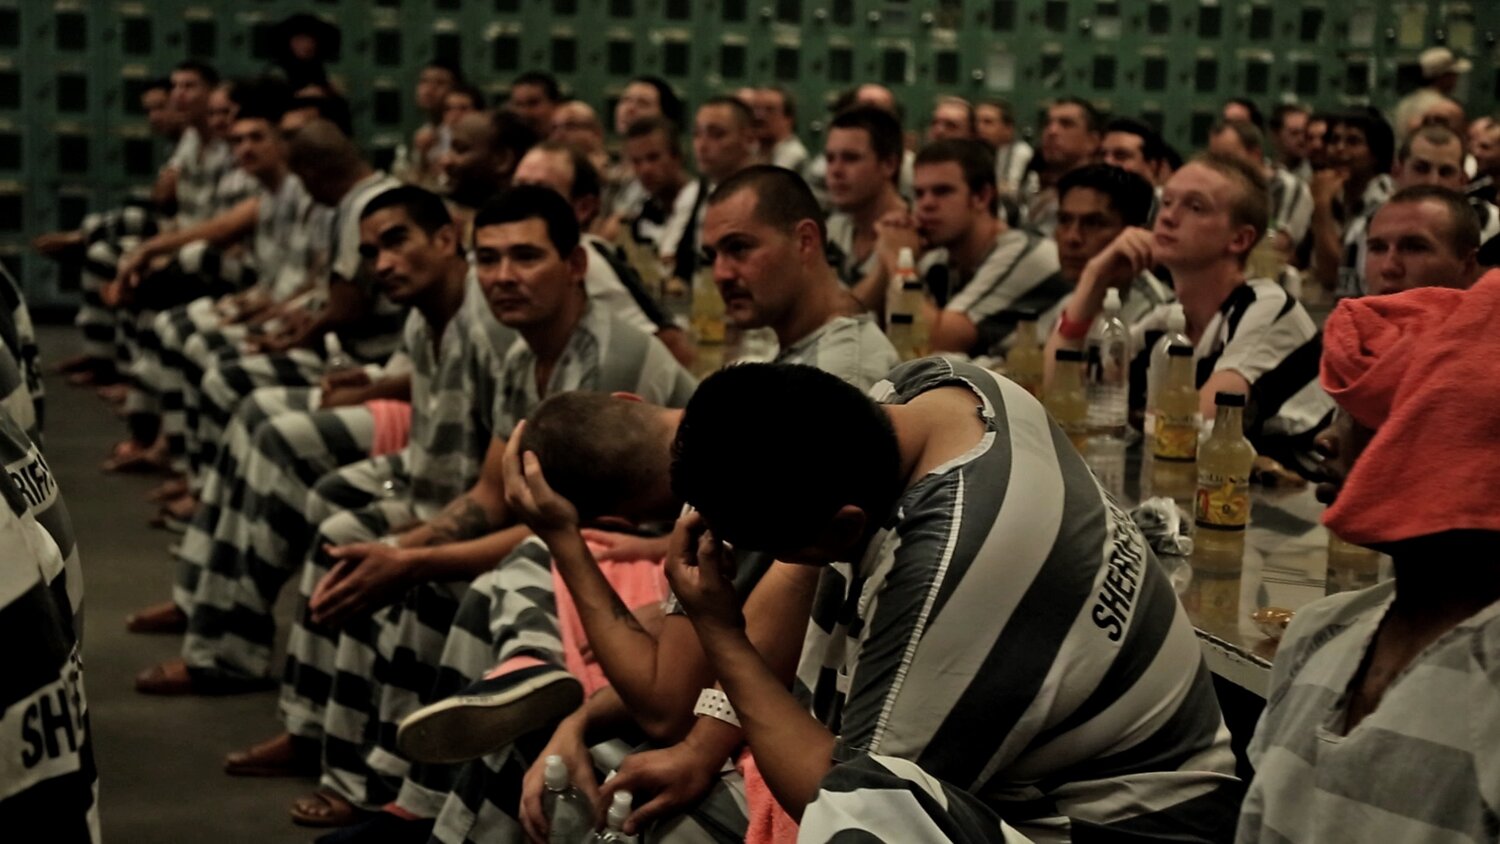 Inmates in Mess hall.jpg